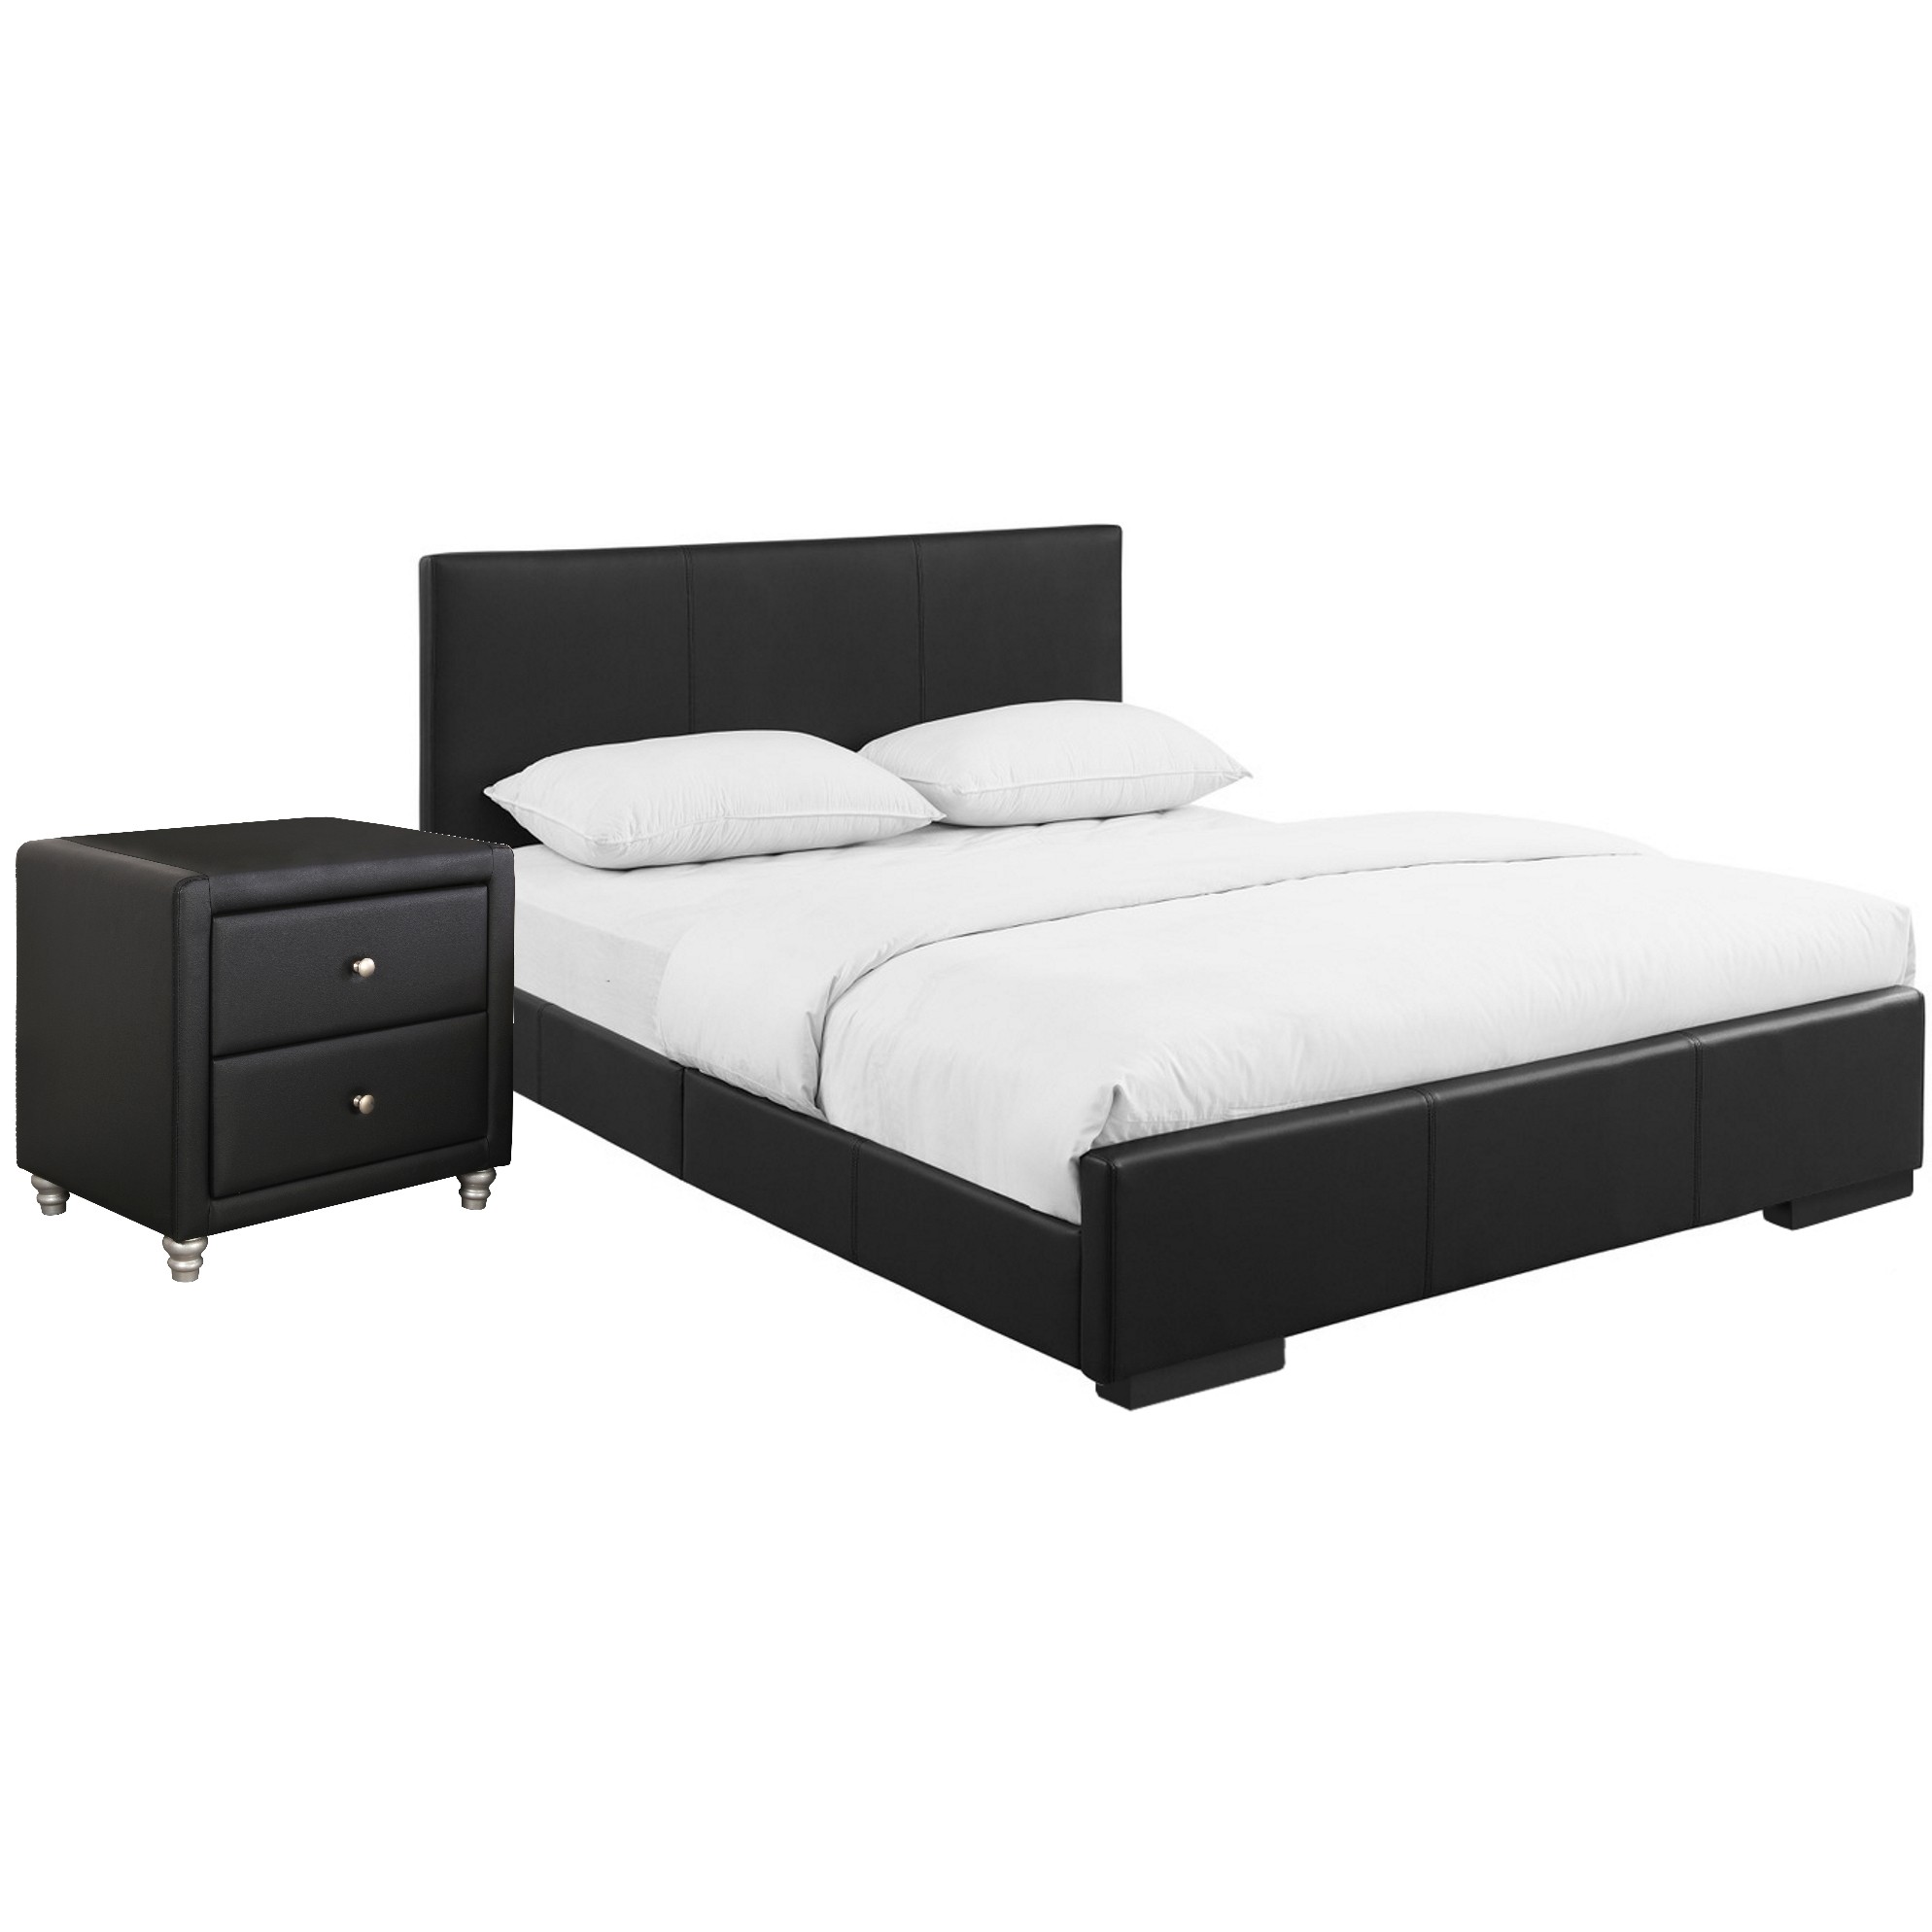 Solid Manufactured Wood Black Standard Bed Upholstered With Headboard-397047-1